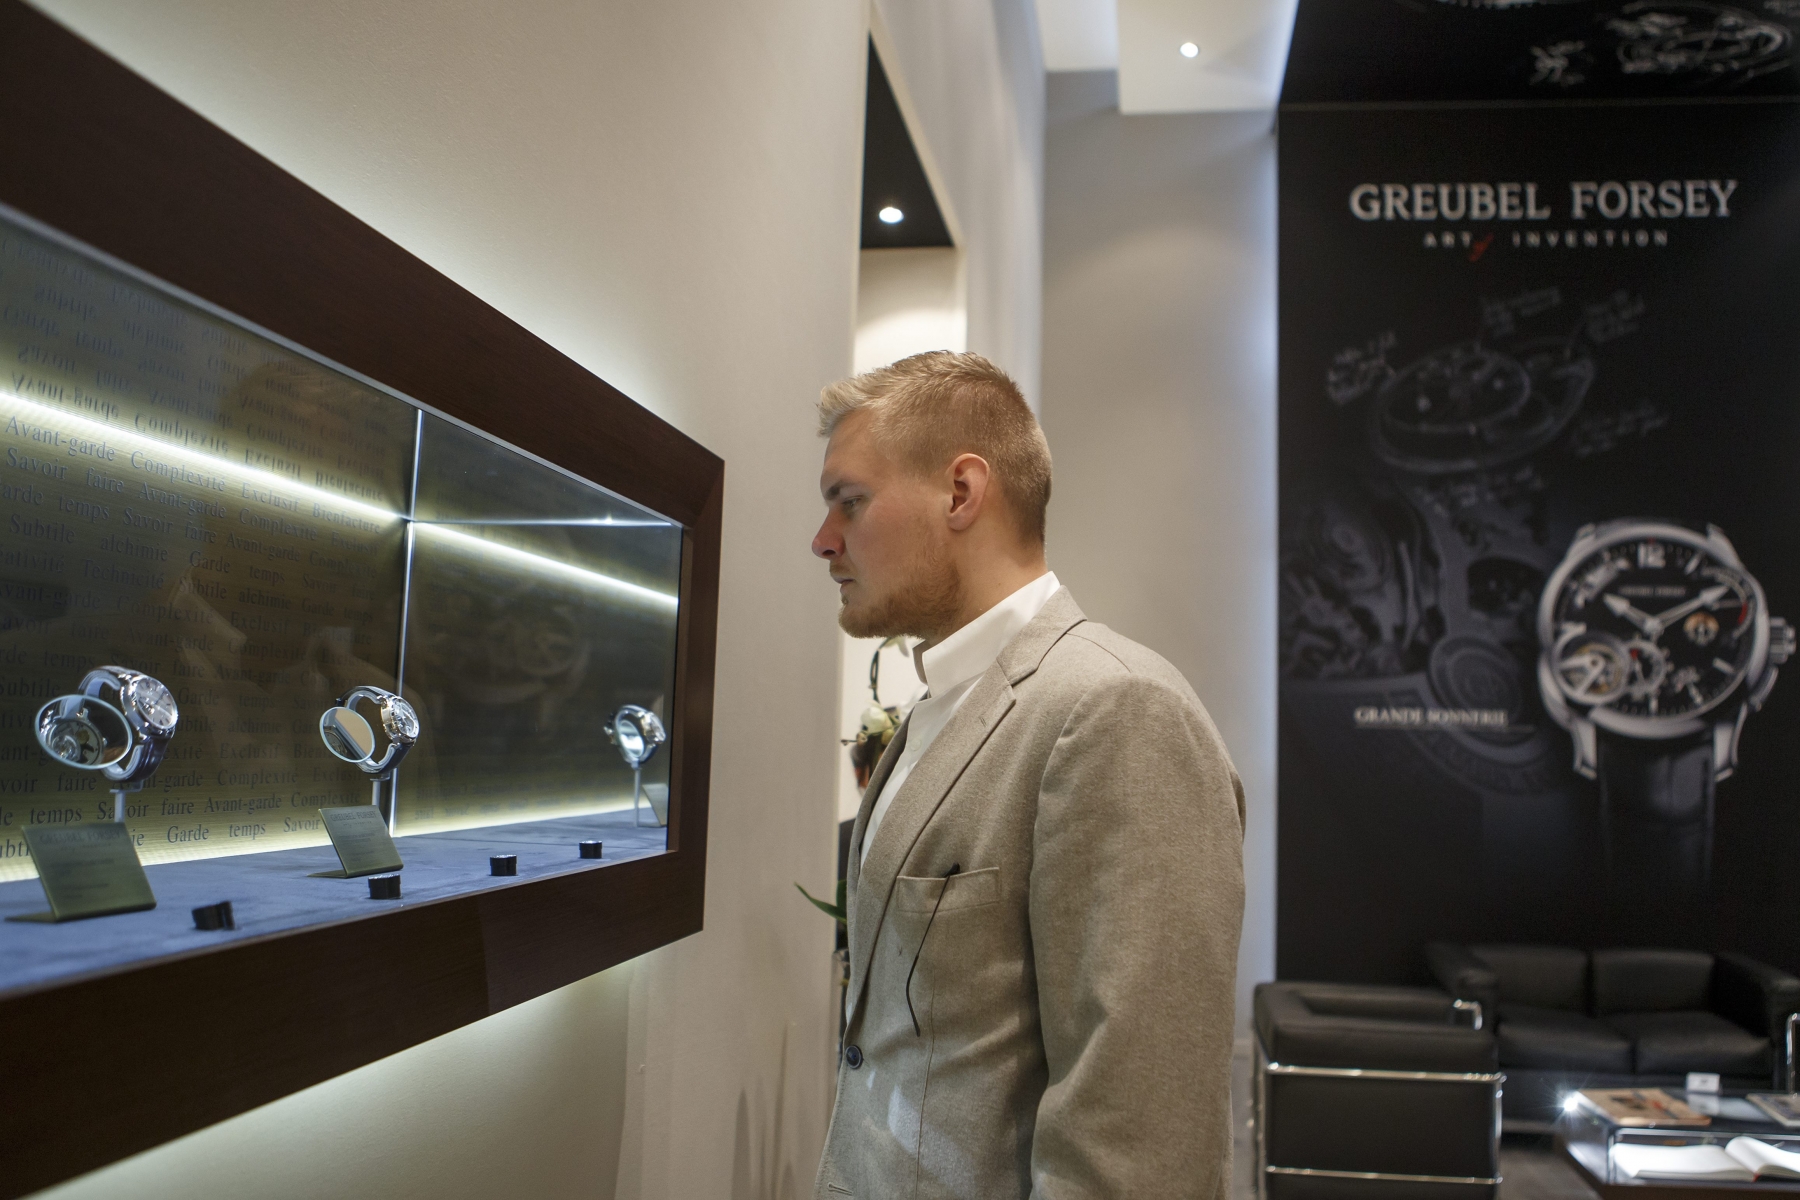 A visitor looks on watches at the Greubel Forsey booth, during the first day of the 27th edition of the Salon International de la Haute Horlogerie, SIHH, in Geneva, Switzerland, on Monday, January 16, 2017. (KEYSTONE/Salvatore Di Nolfi)